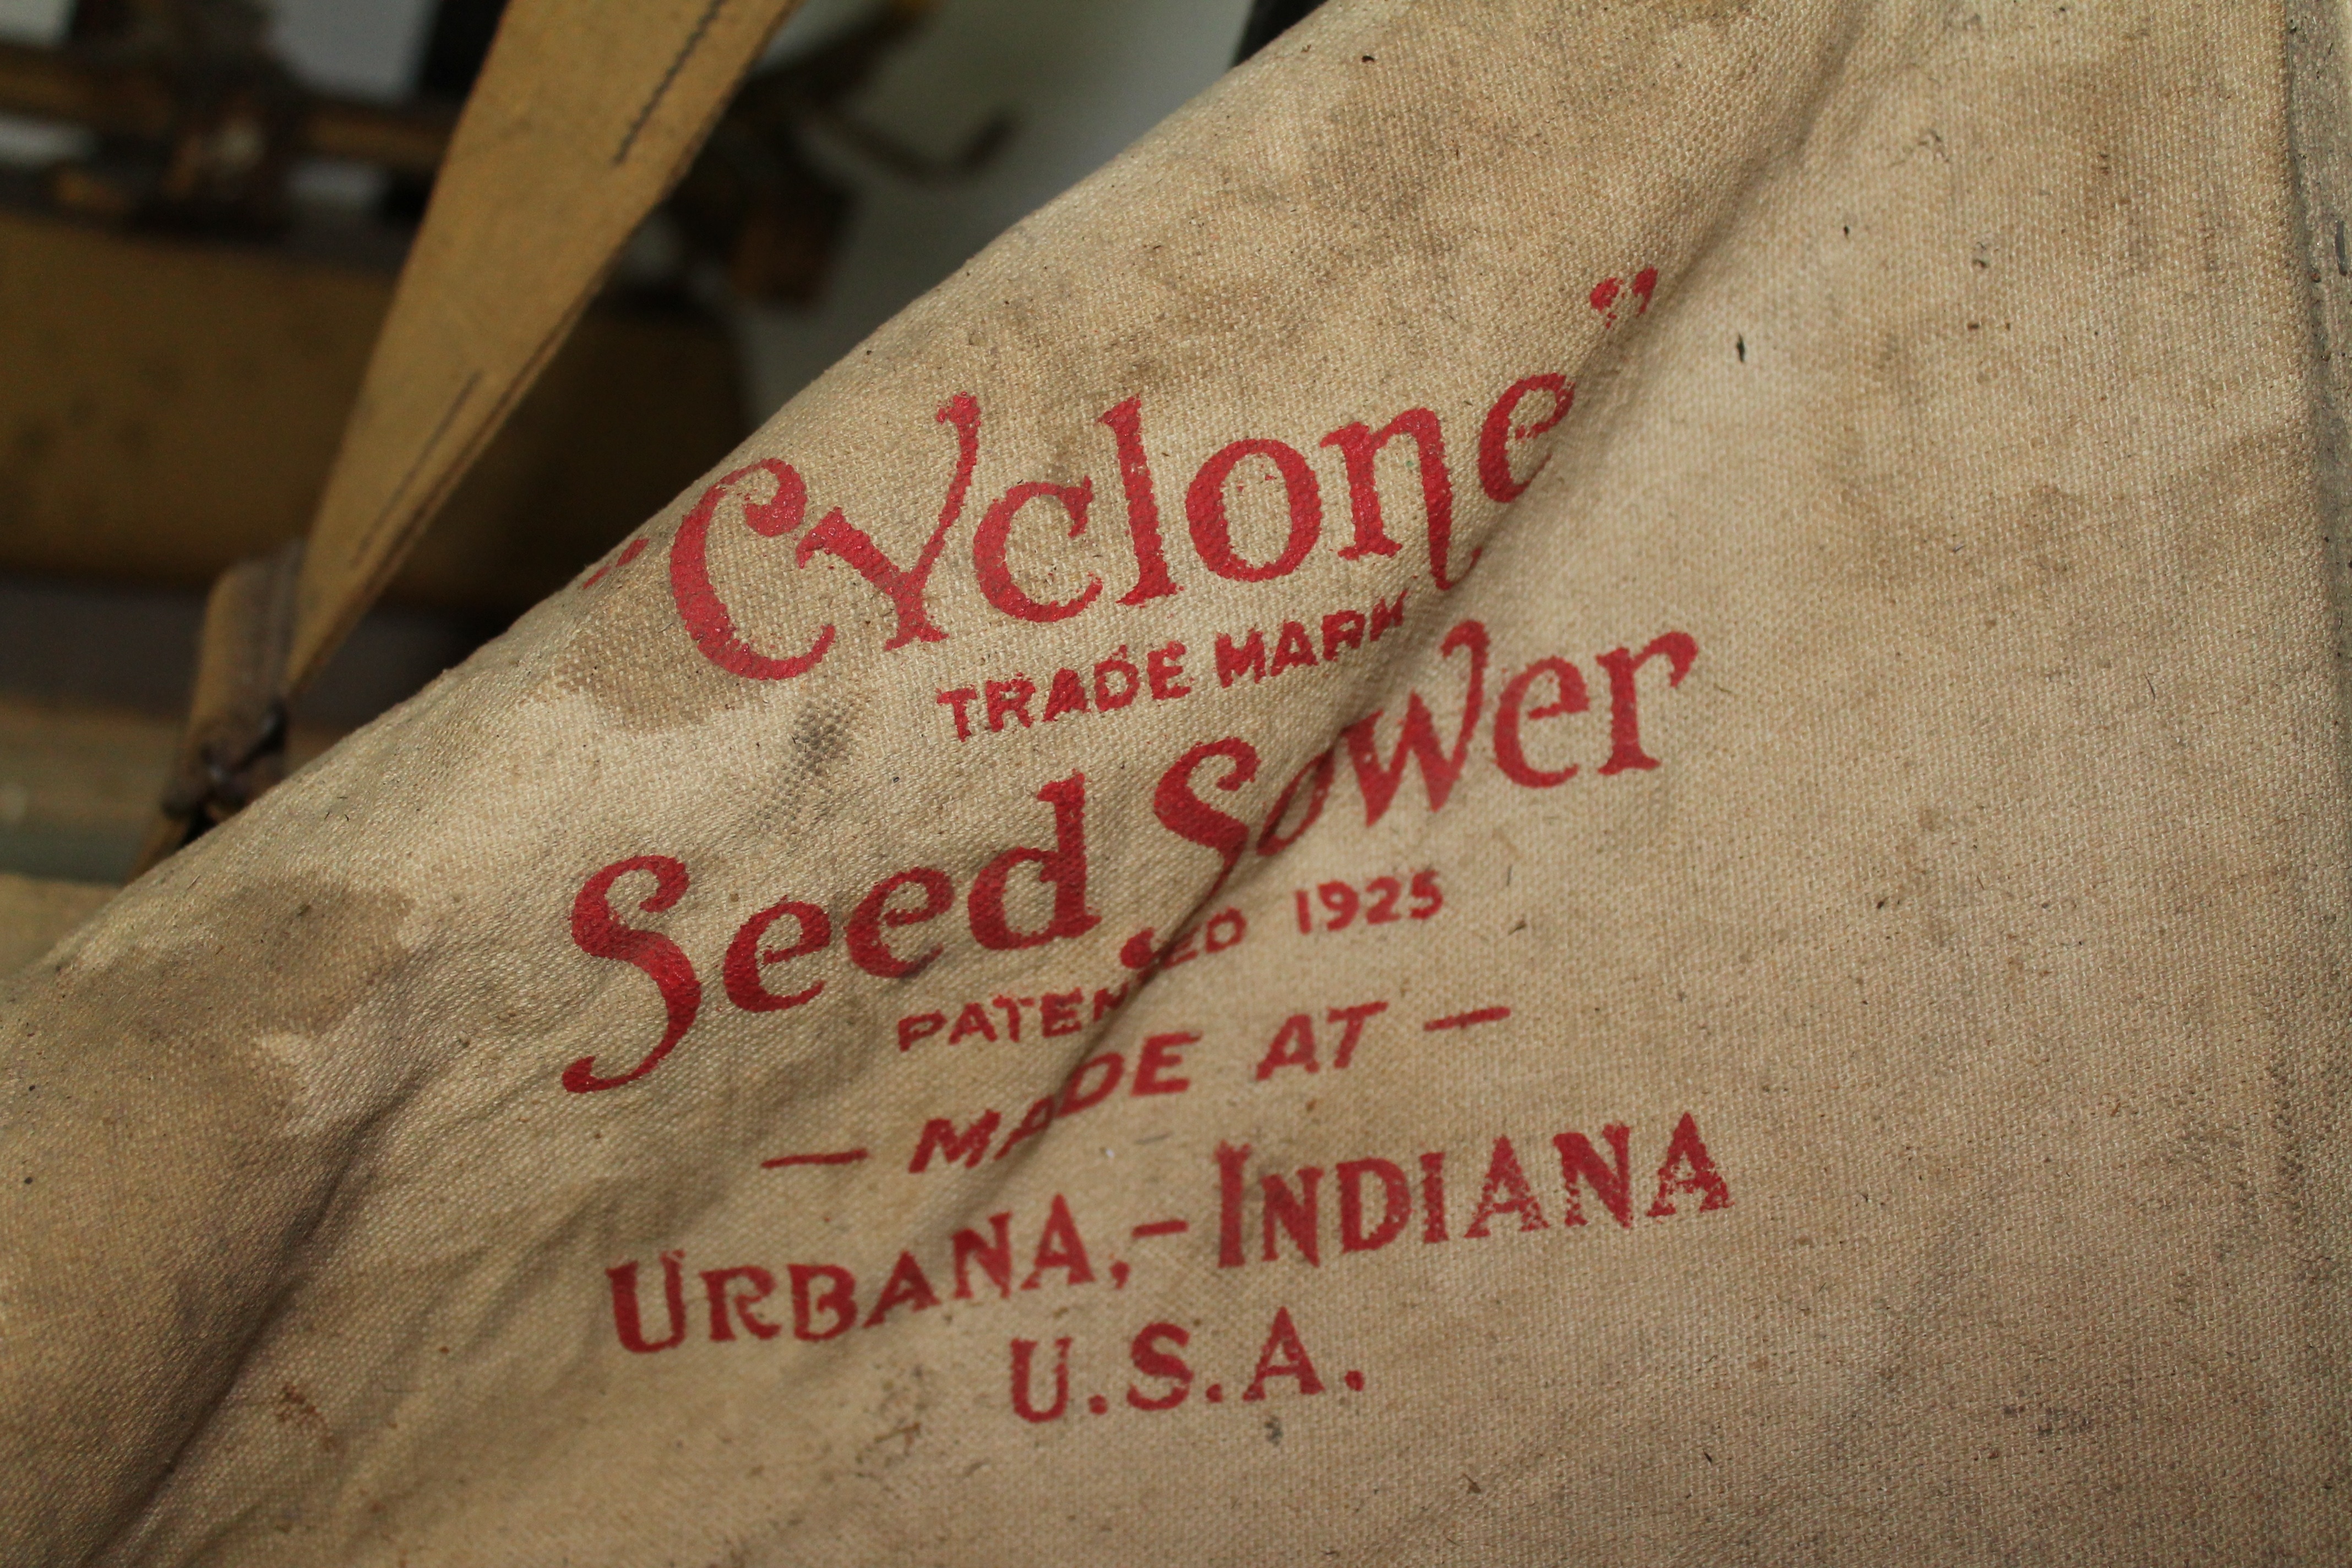 grey and red cyclone trade mark seed sower sack